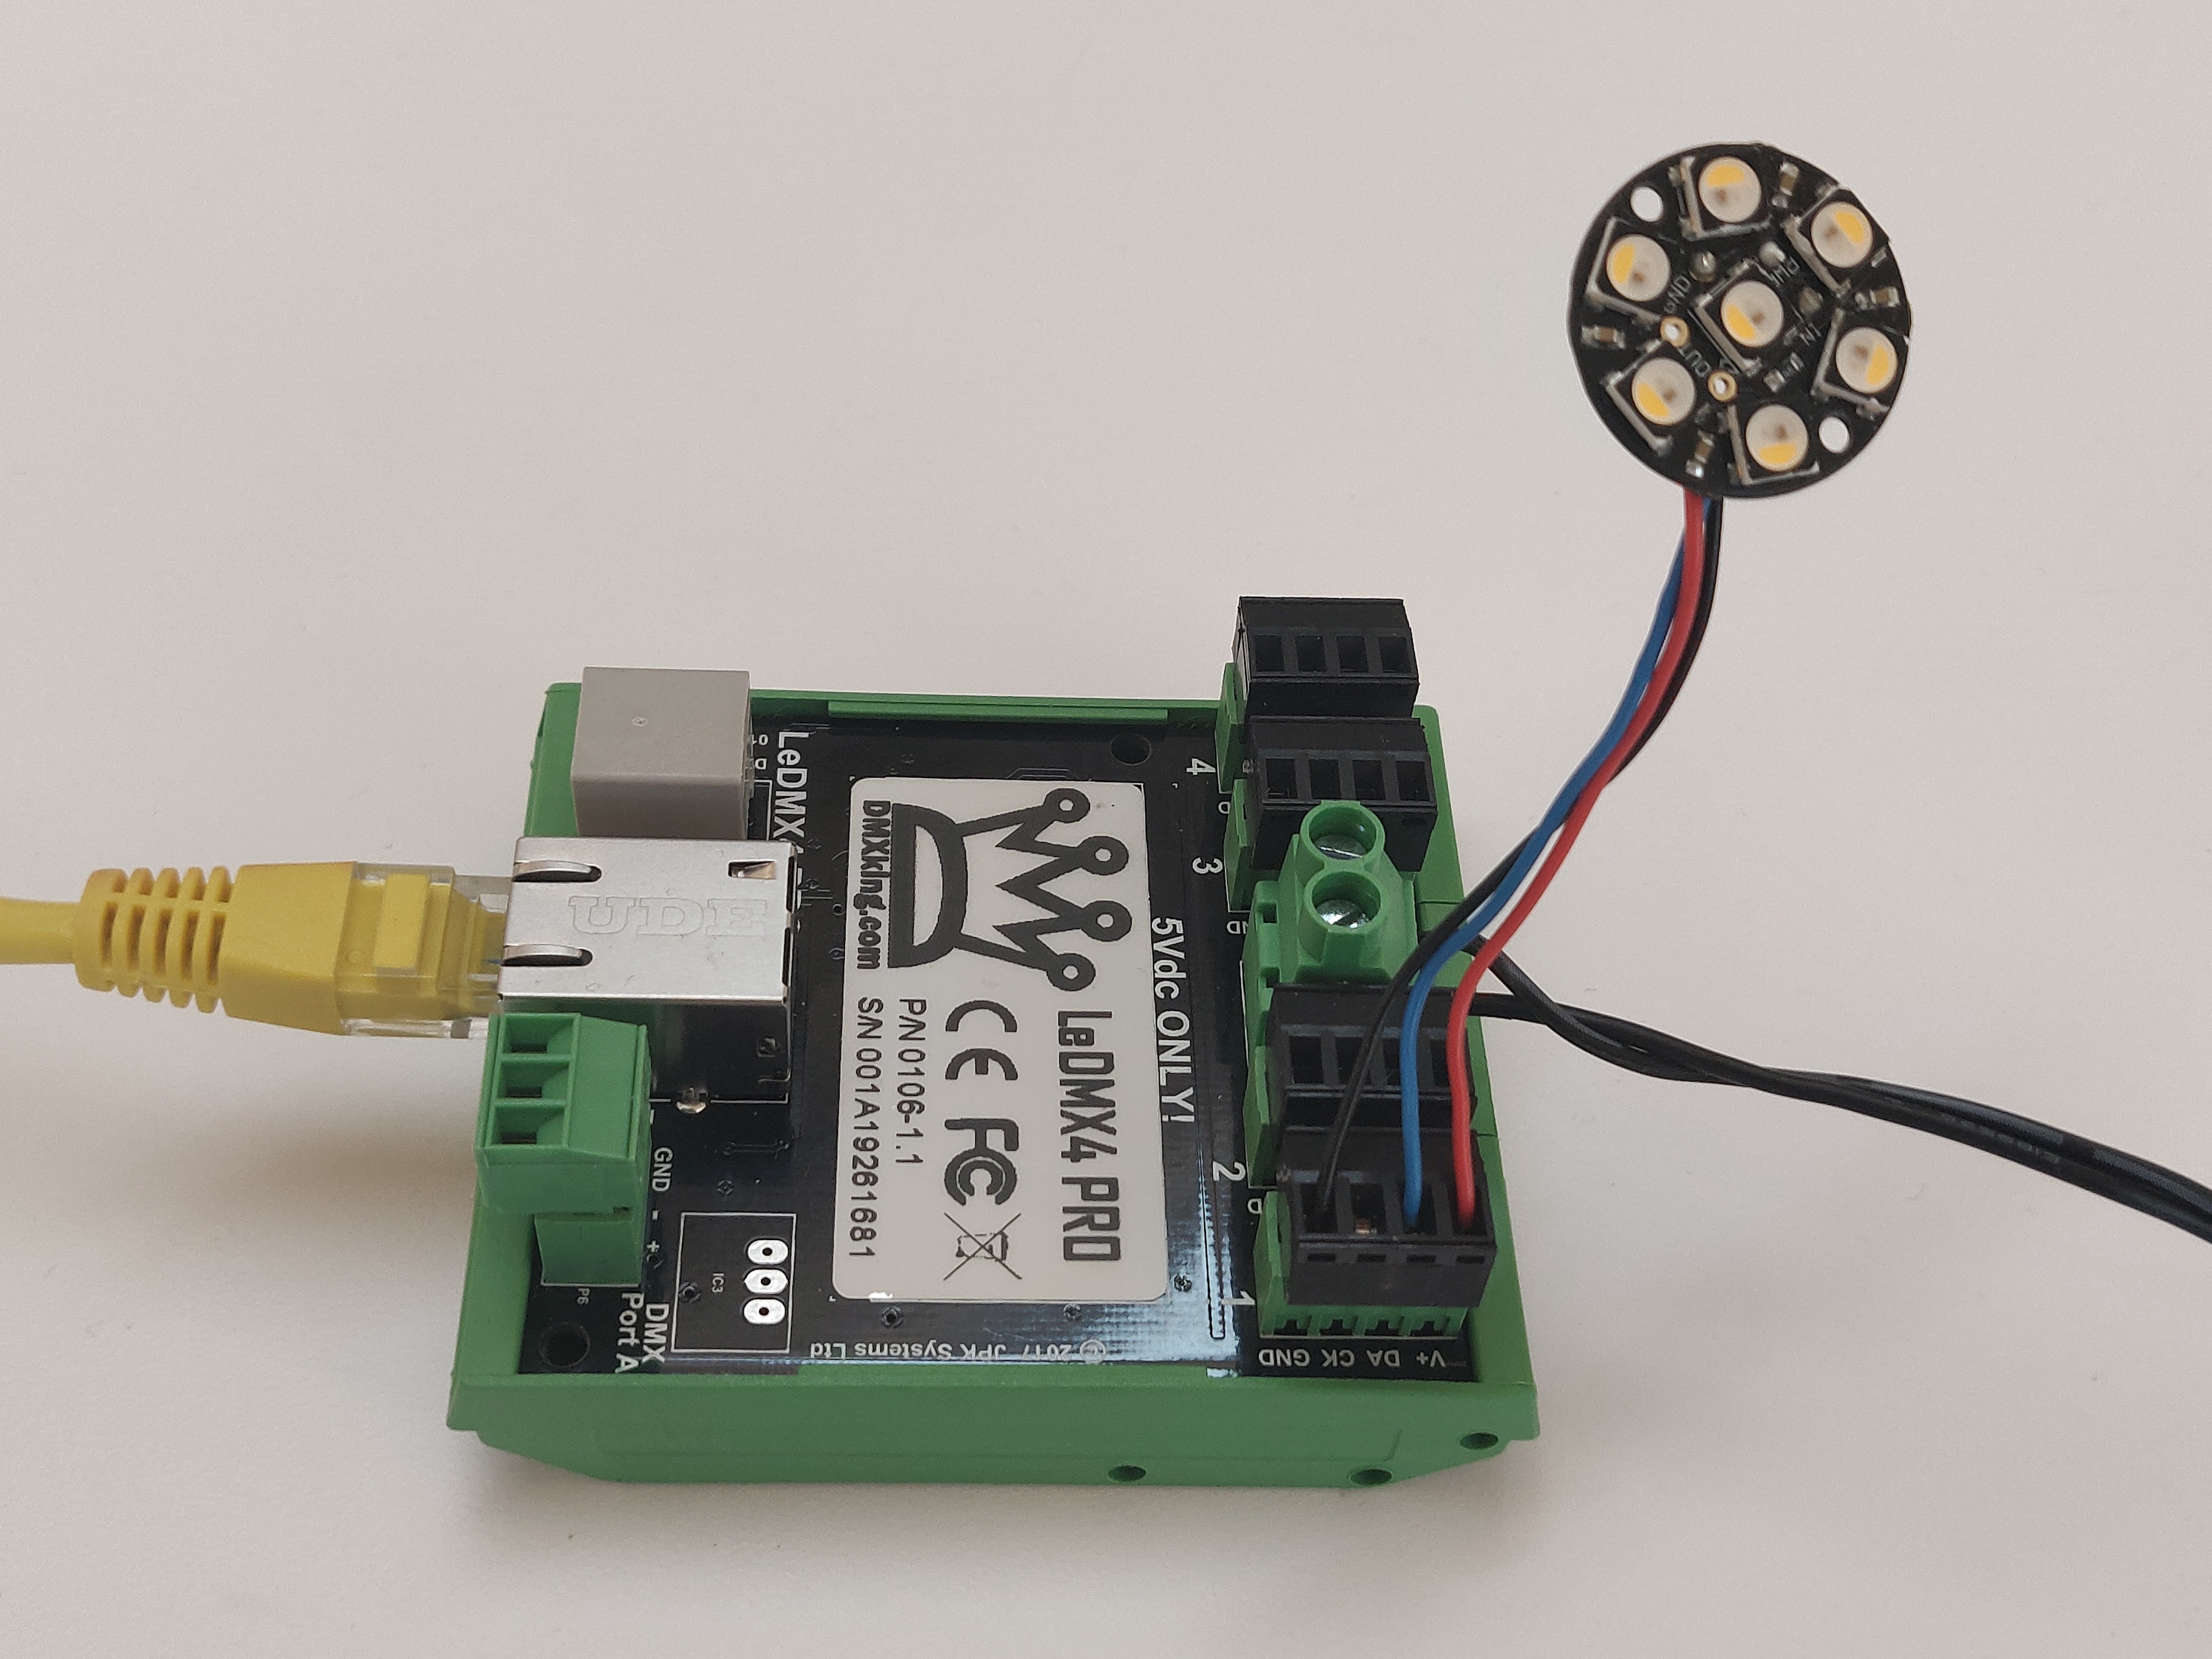 Figure 1. NeoPixel Jewel, a WS2812 module, connected to Universe 1 of a LeDMX Pro4